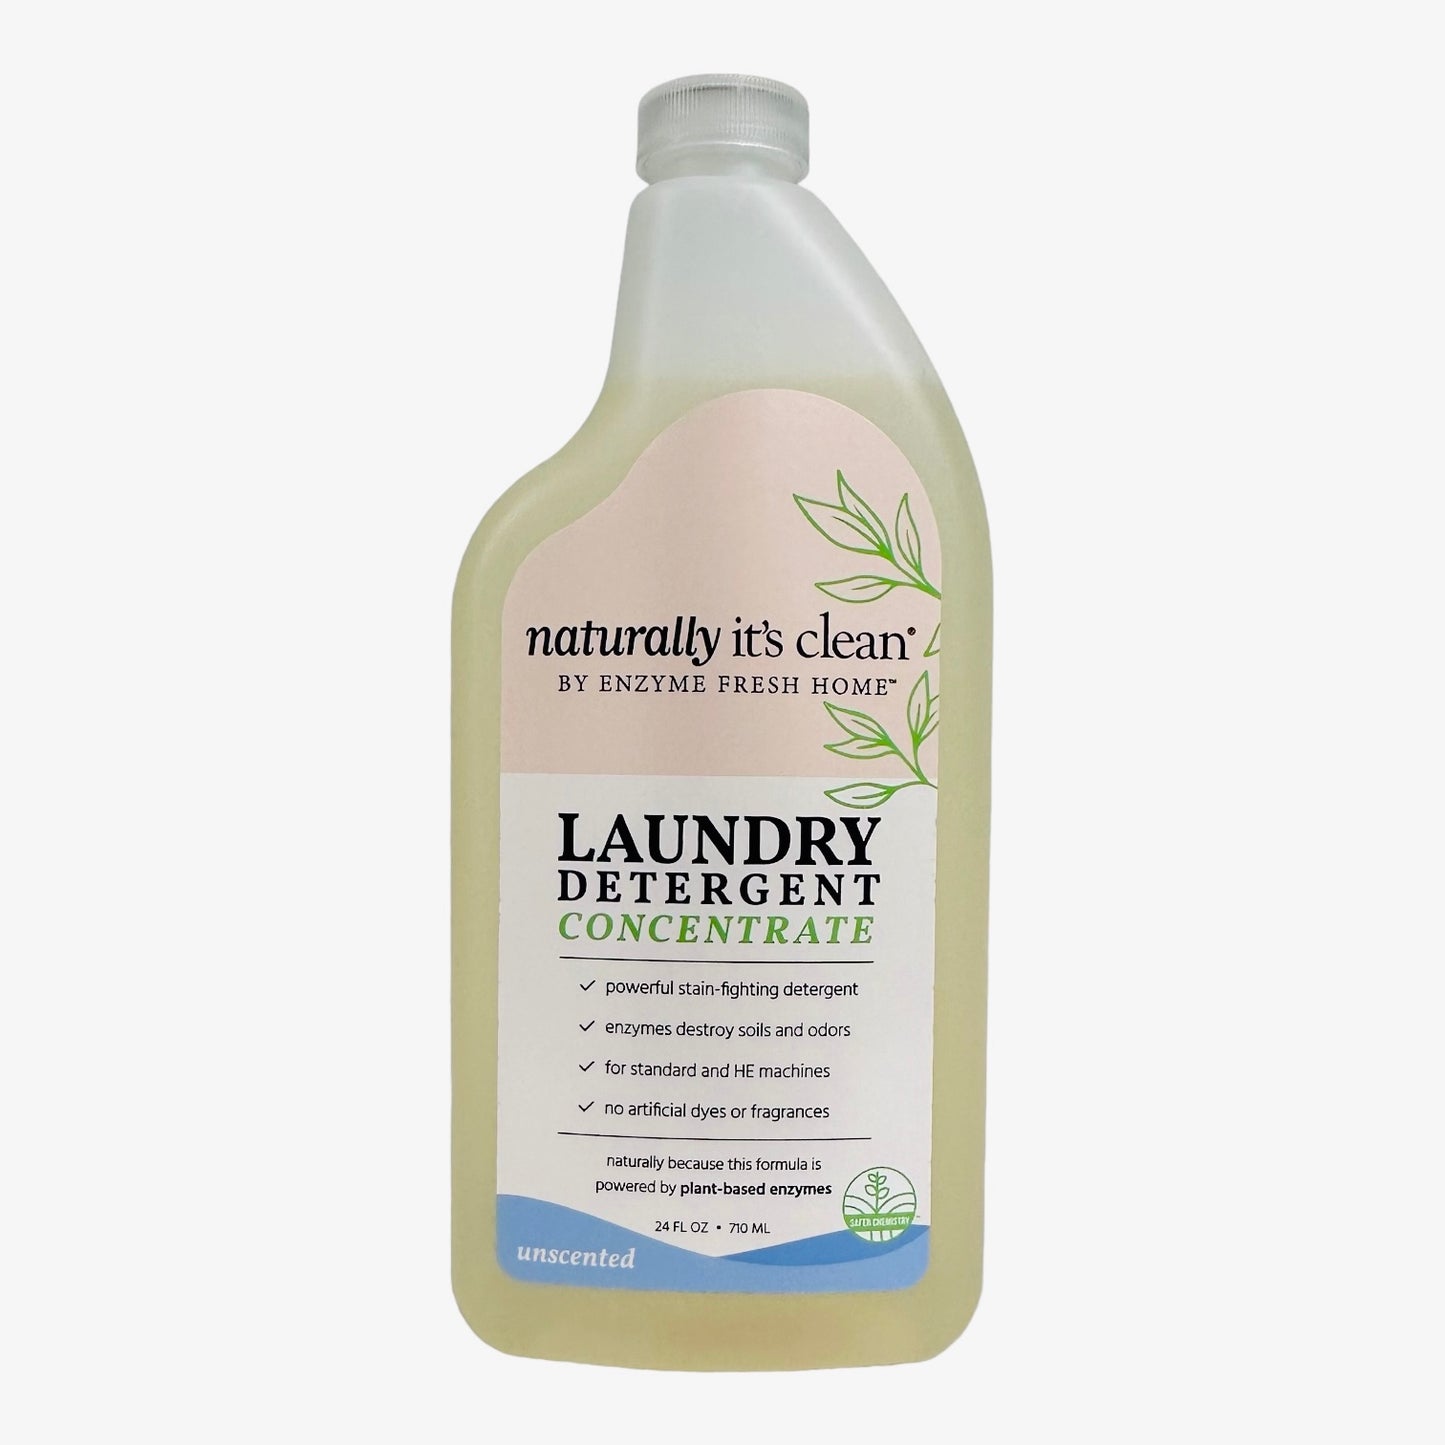 Laundry Detergent Concentrate Unscented 24 ounces